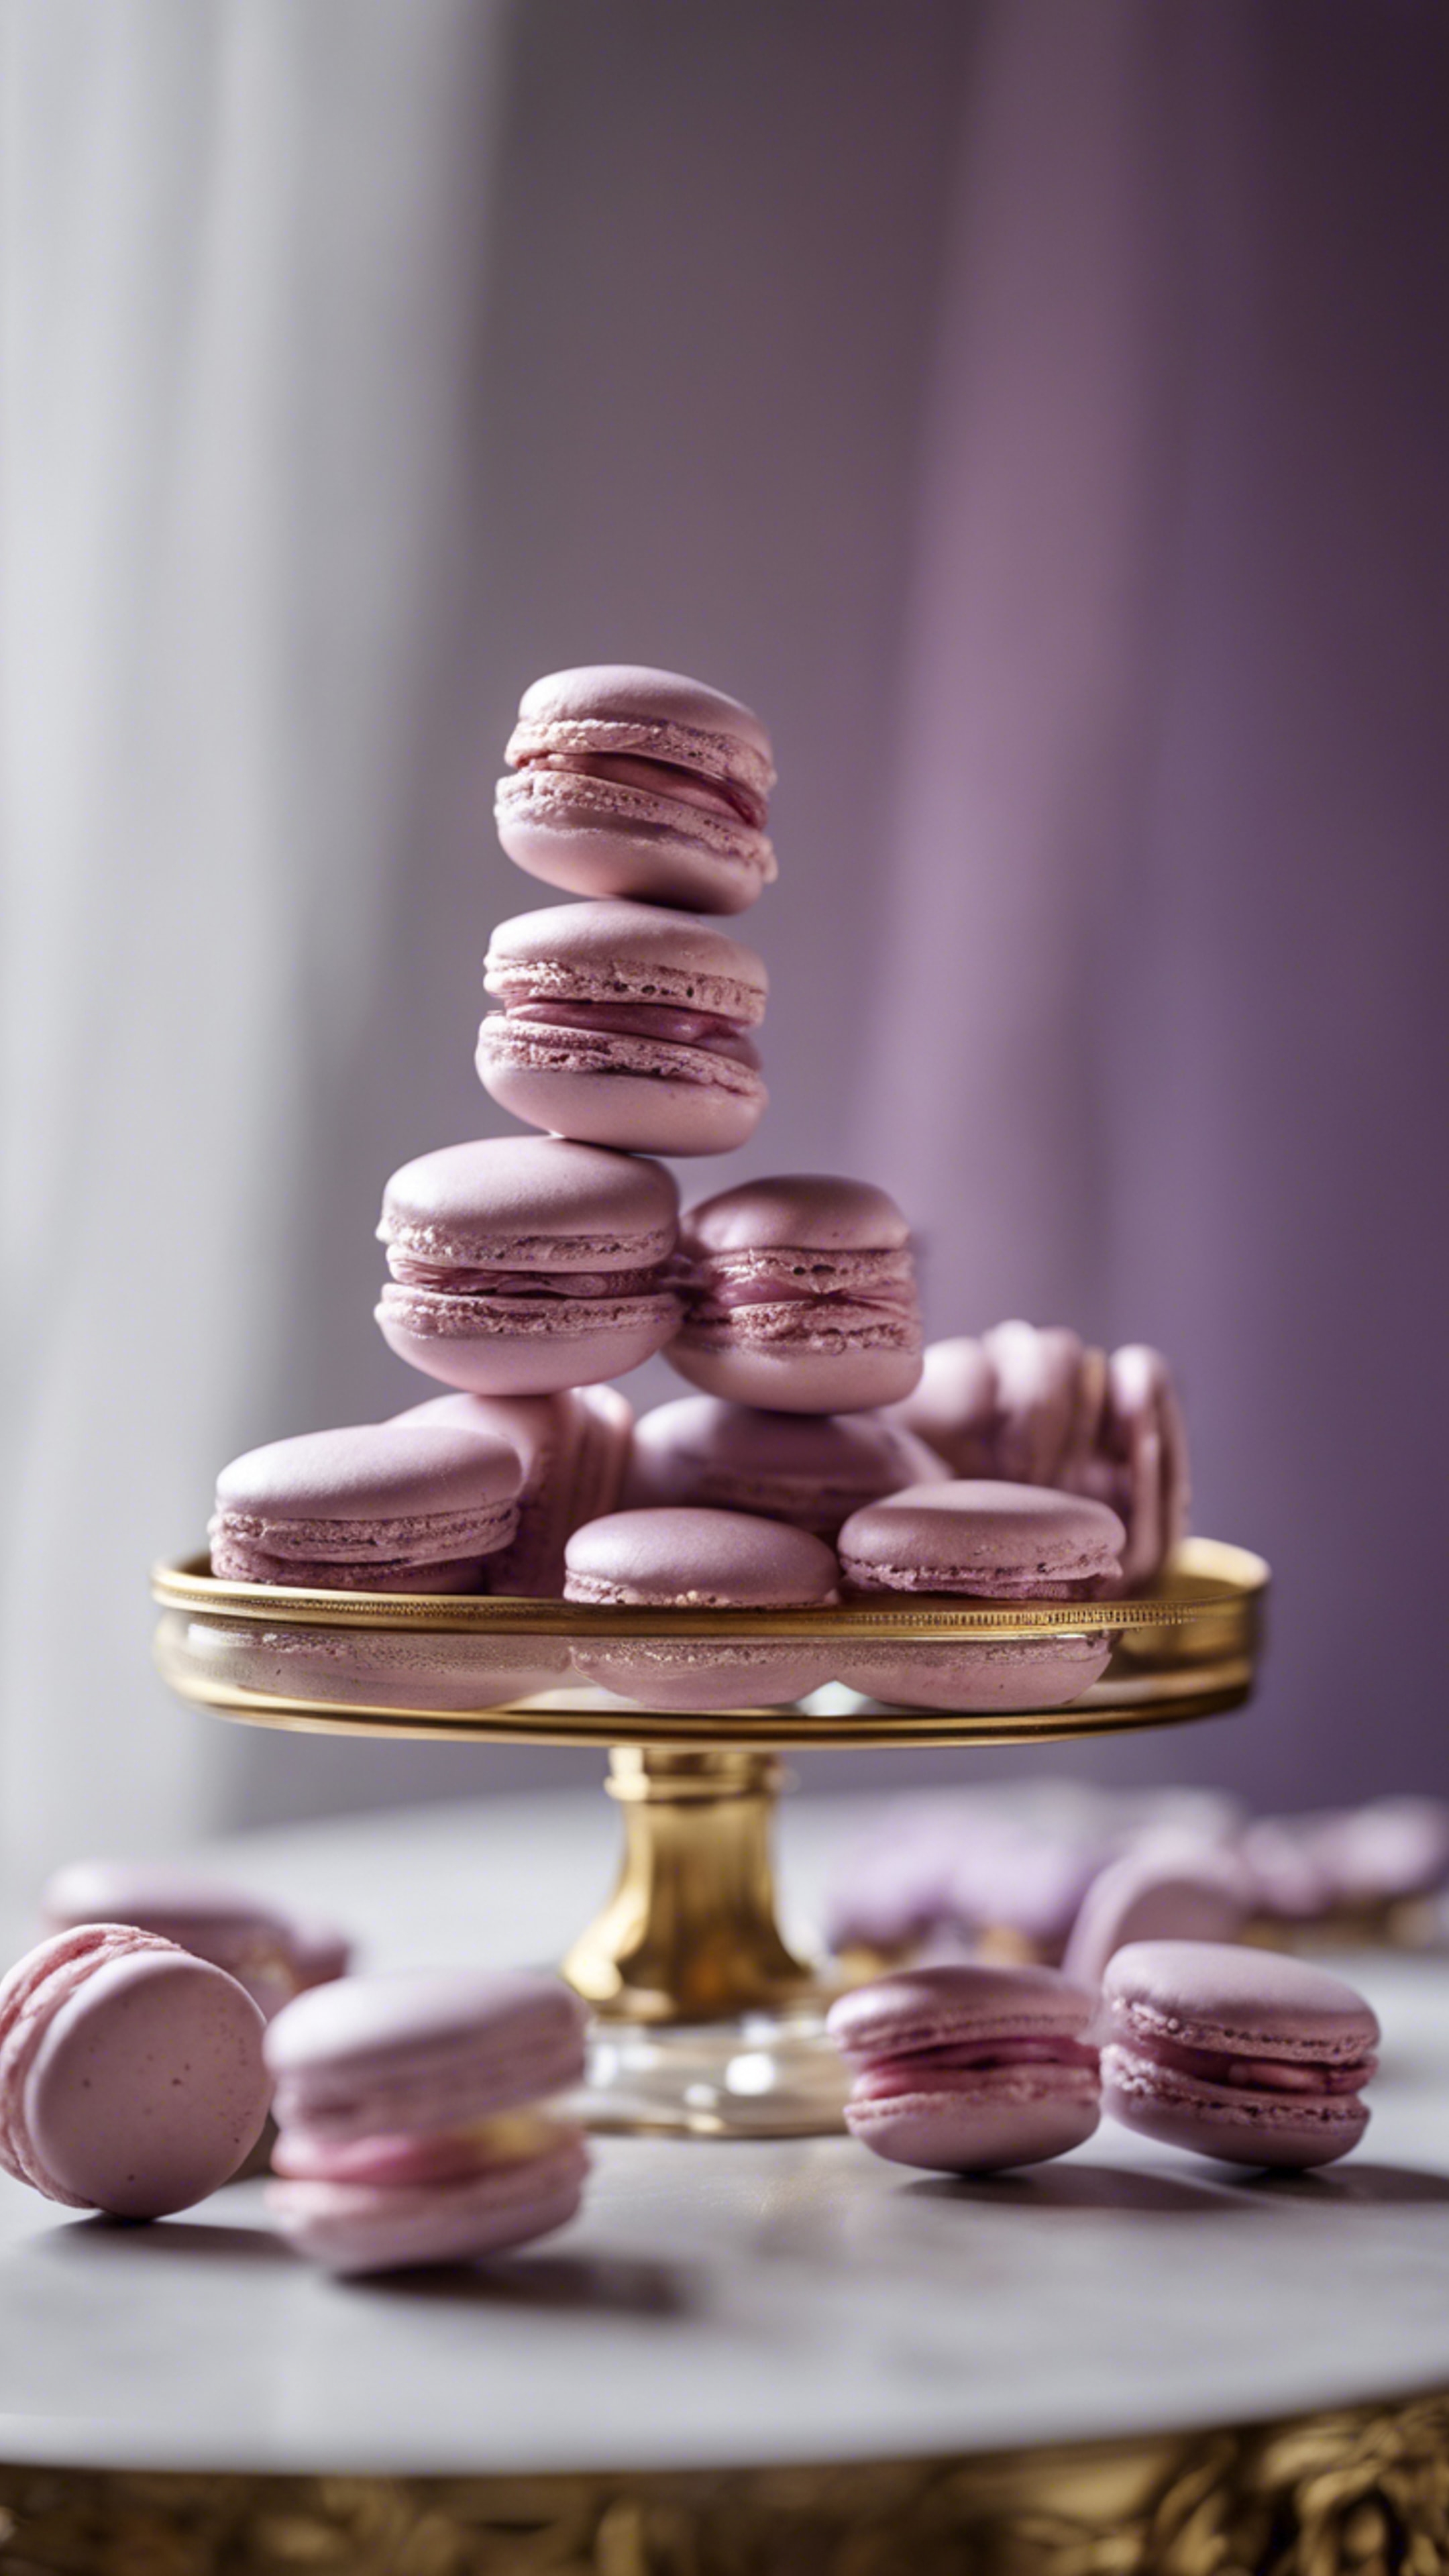 A box of light purple macarons perched on a chic, creamy pedestal table. Hintergrund[d2f6108c9ad74ba2a0c7]